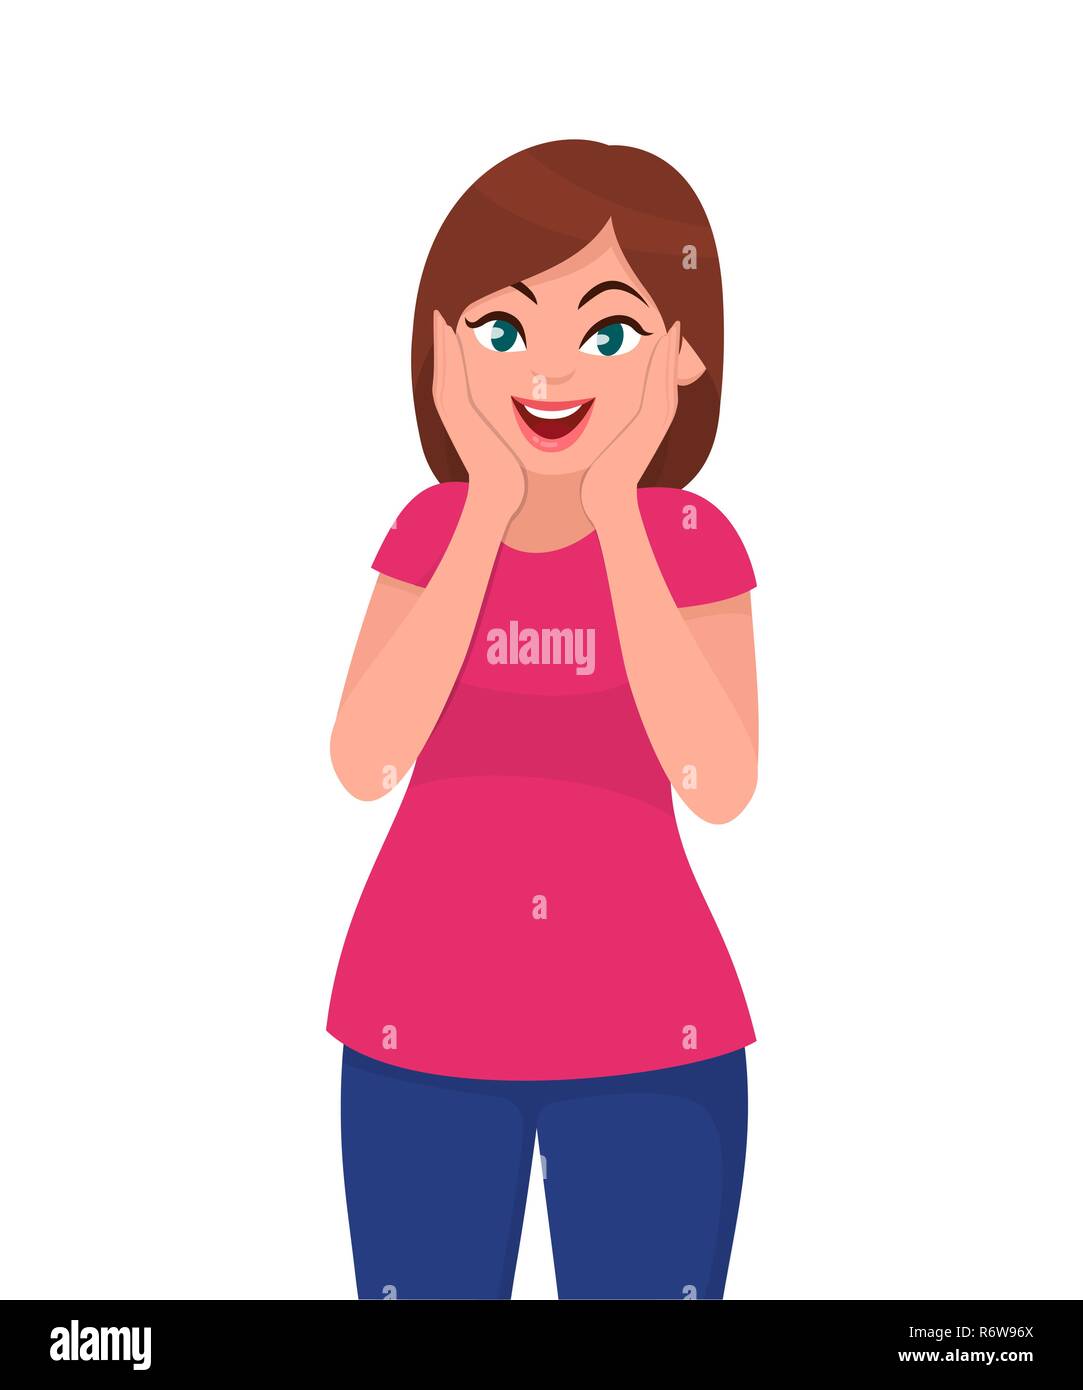 Amazed or surprised pretty young woman holding hands on face. Human emotion and body language concept illustration in vector cartoon flat style. Stock Vector